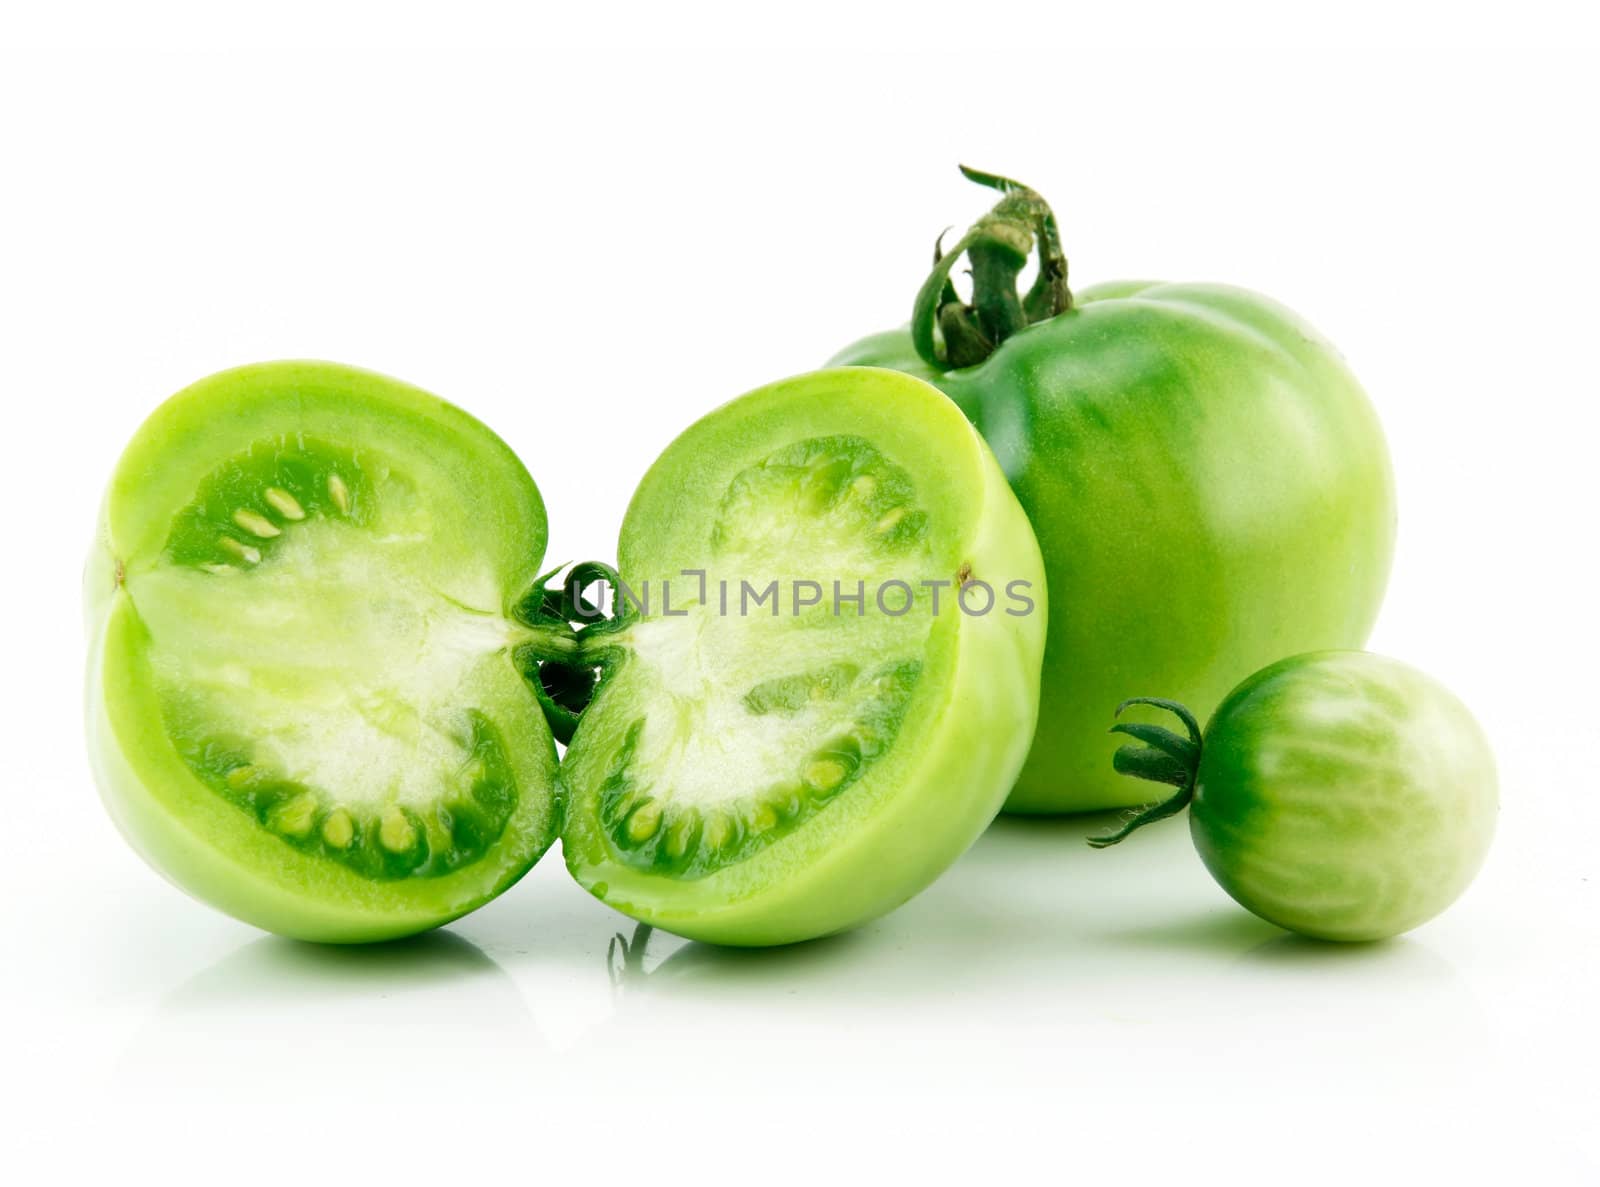 Ripe Green Sliced Tomatoes Isolated on White Background